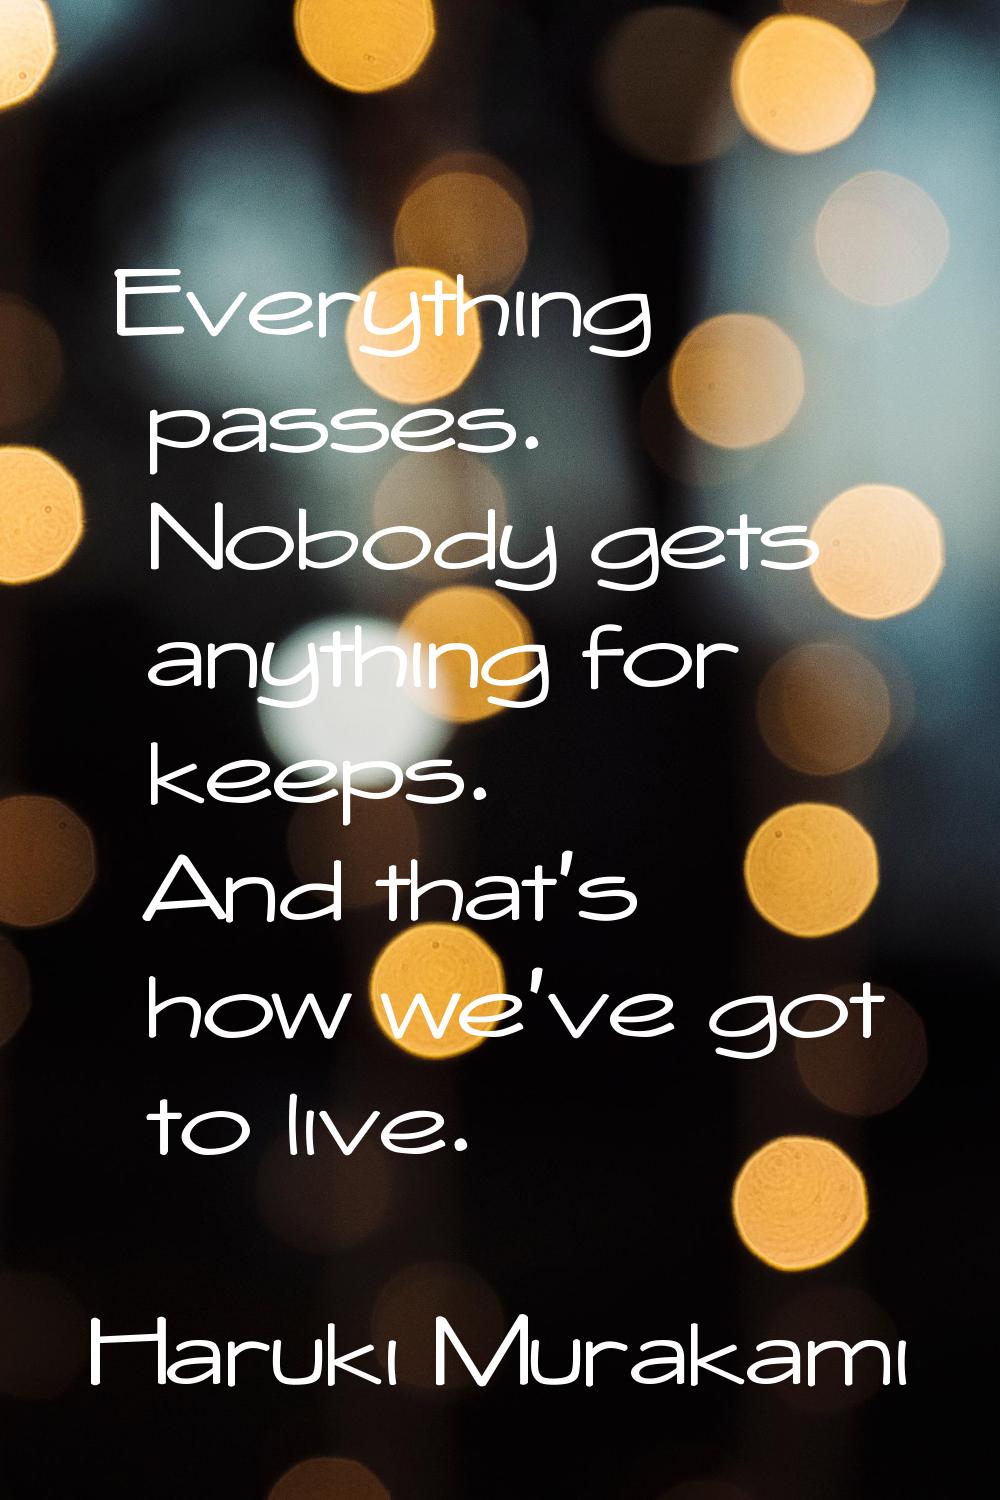 Everything passes. Nobody gets anything for keeps. And that's how we've got to live.